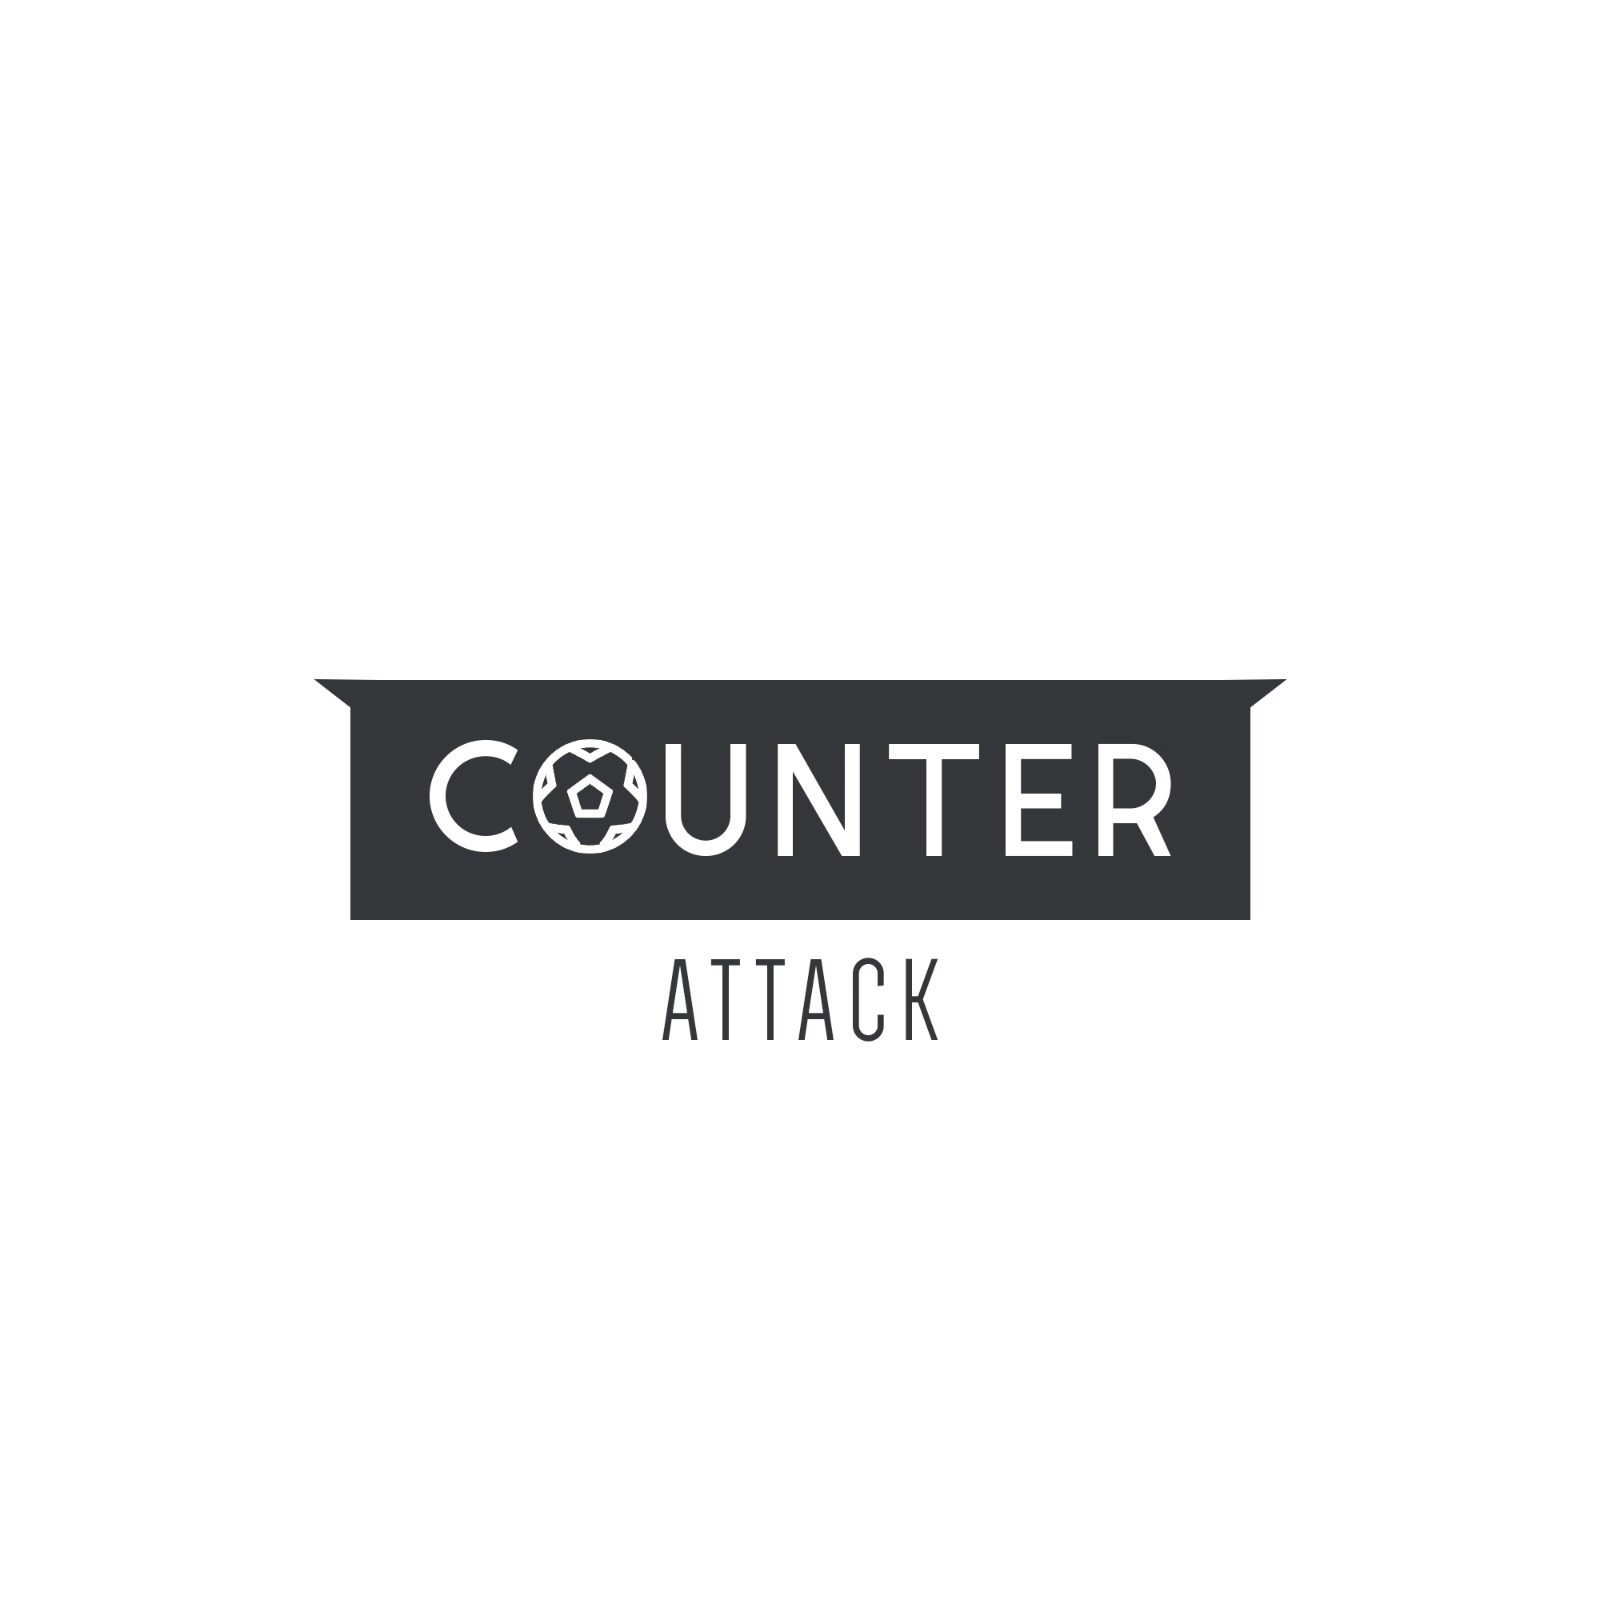 Counter Attack - Episode 62 - Little Bit Messi For United